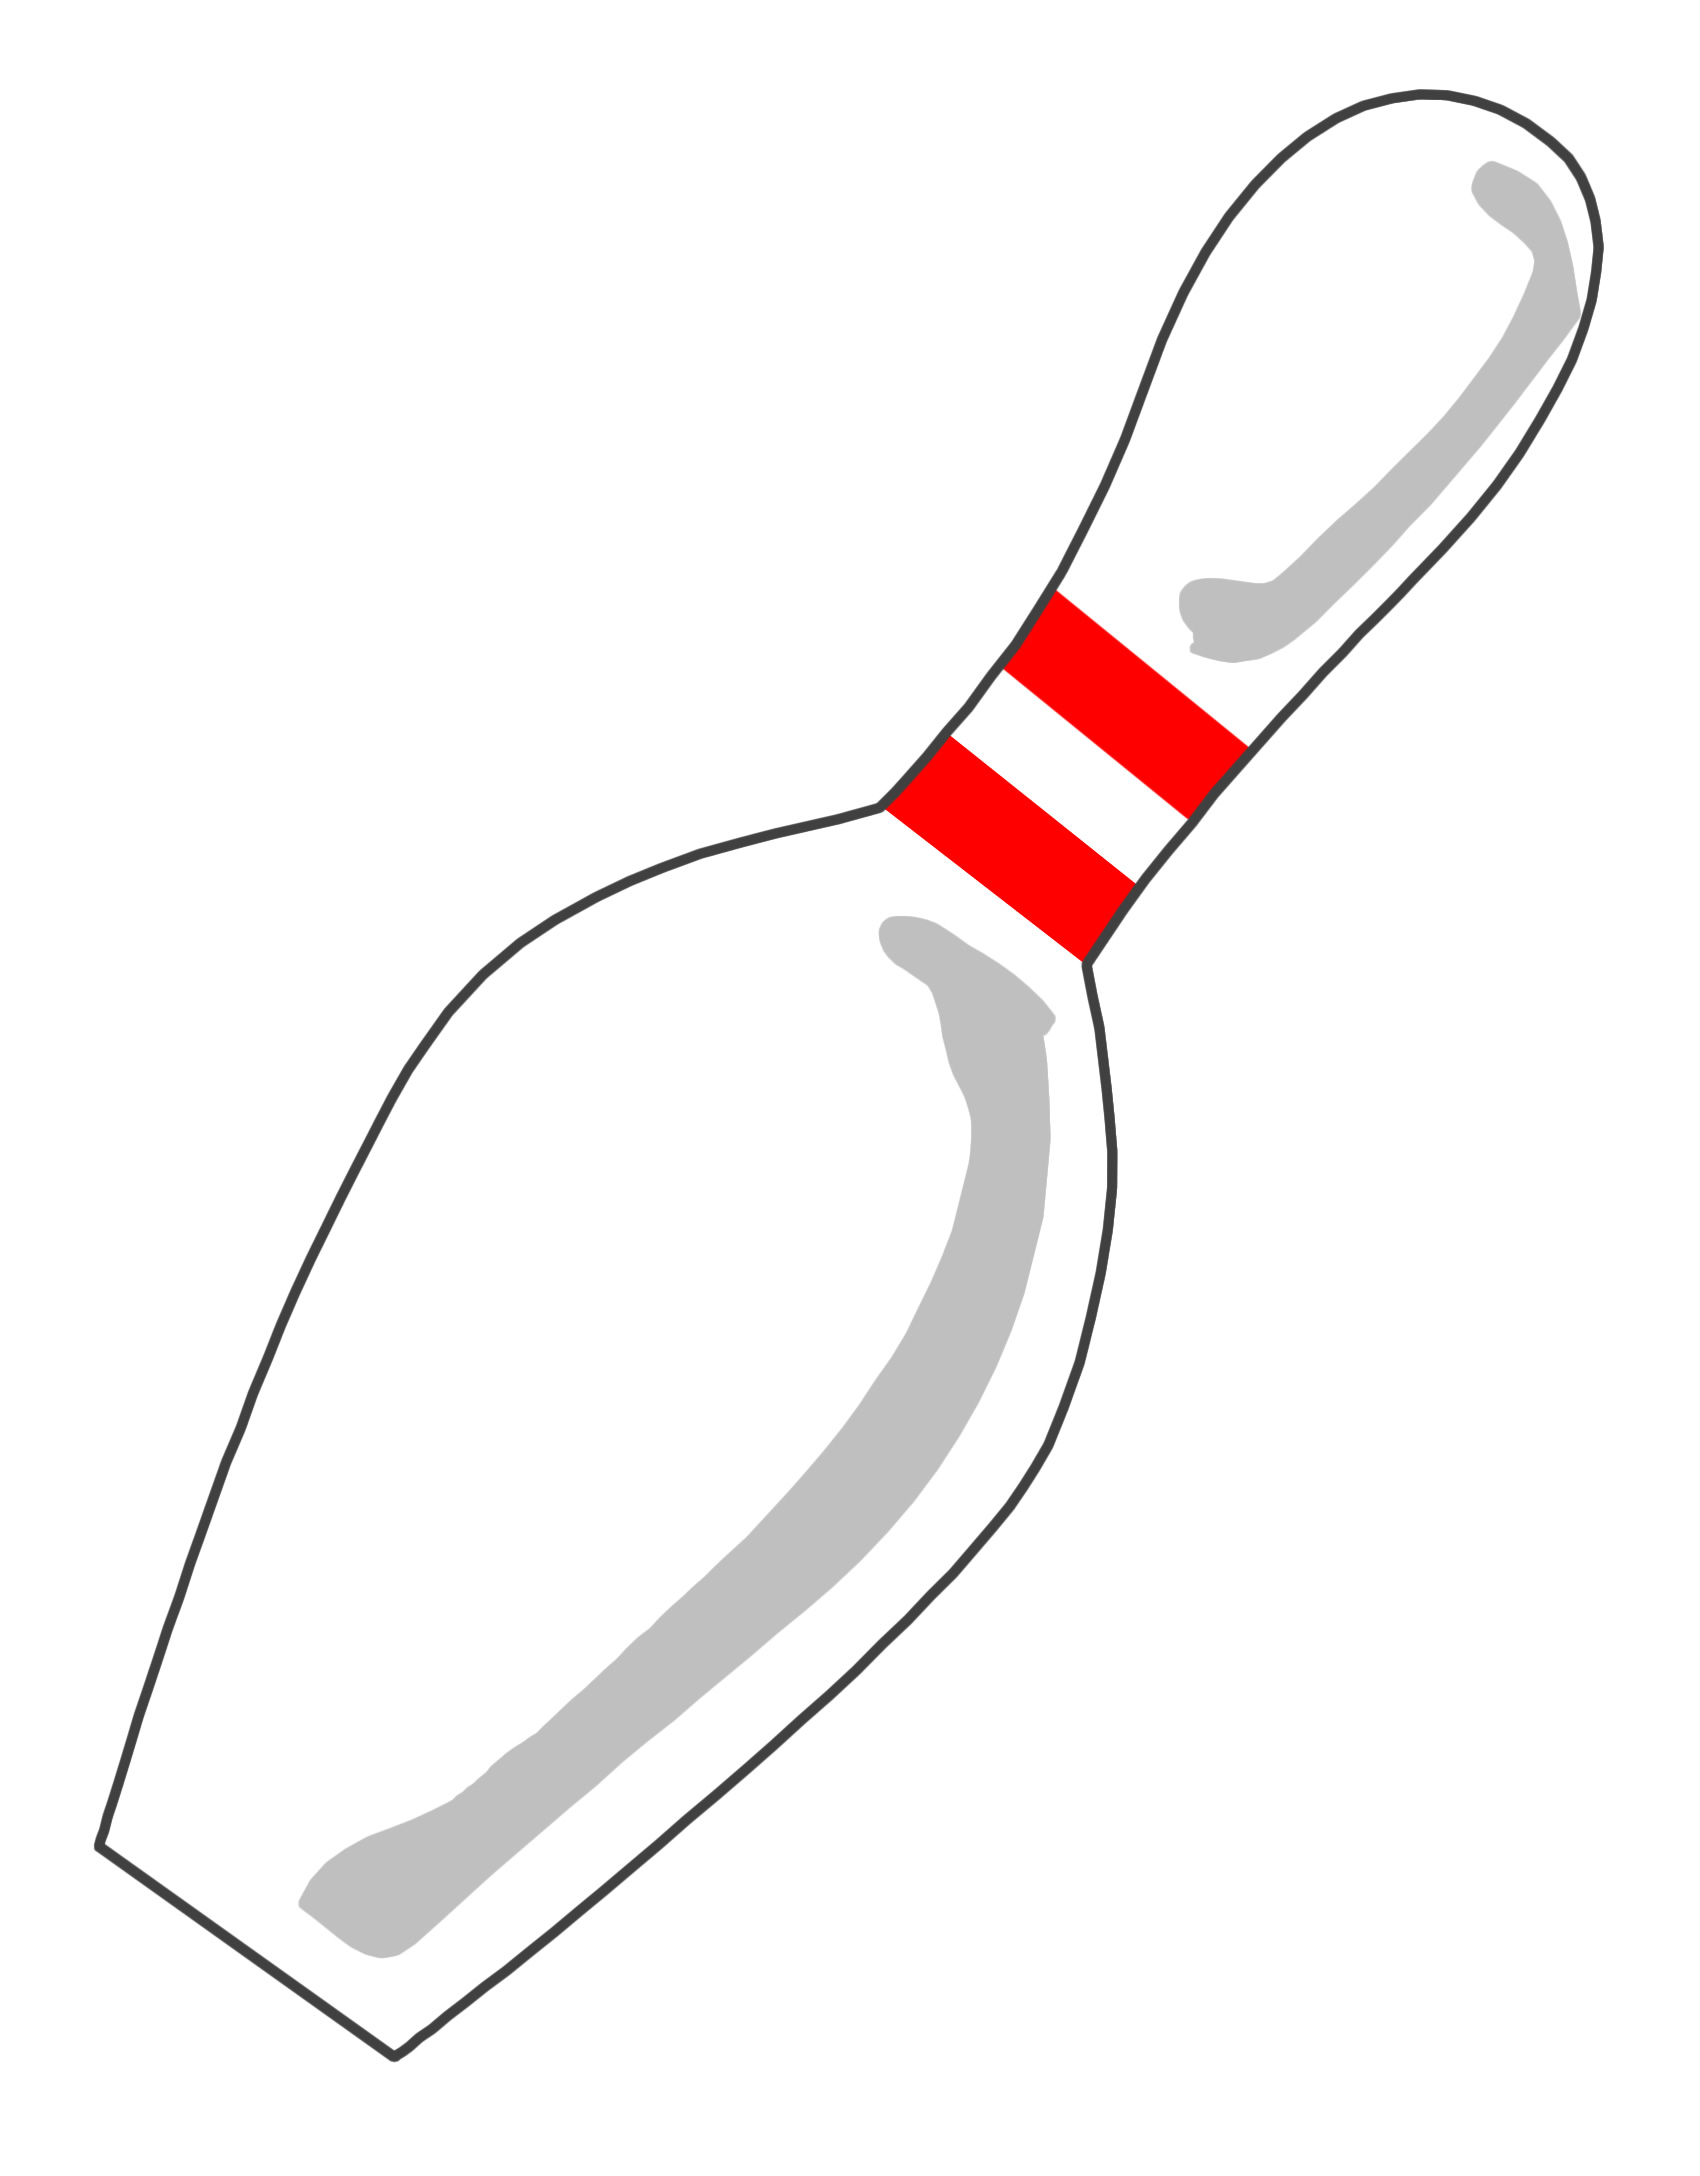 Bowling Pin Outline - Cliparts.co